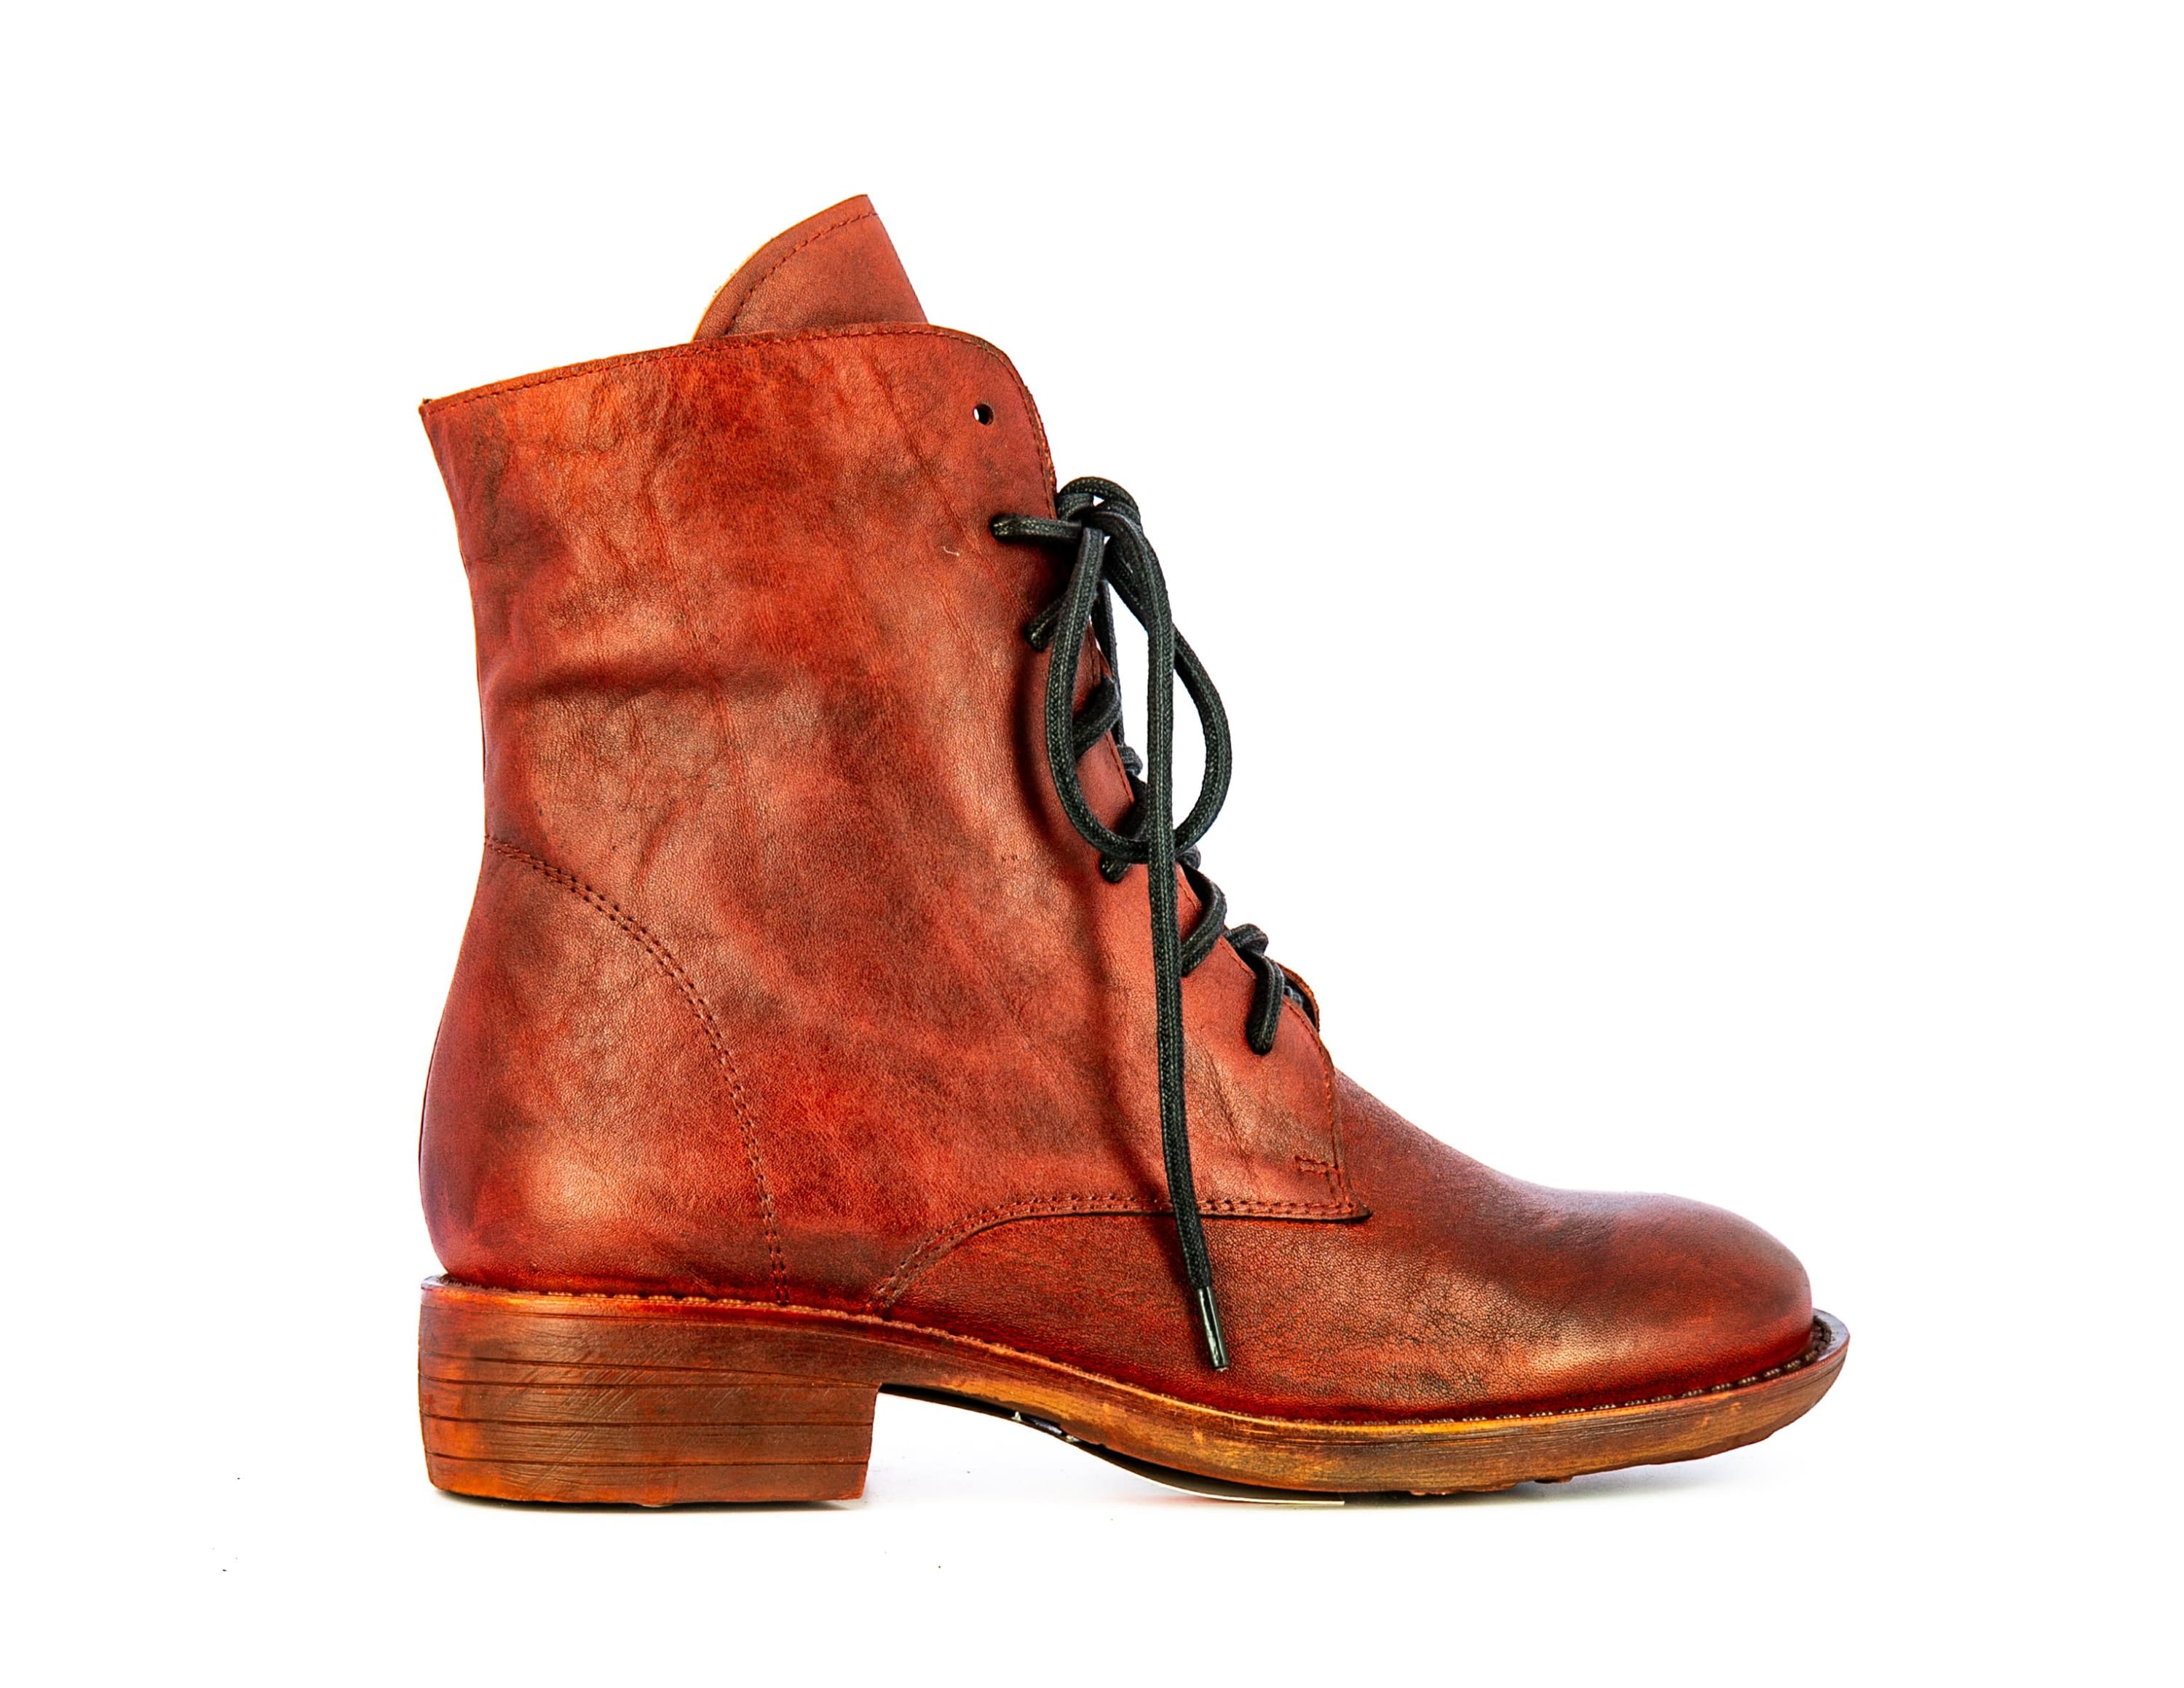 IDCALIAO 11 - 35 / Red - Boots